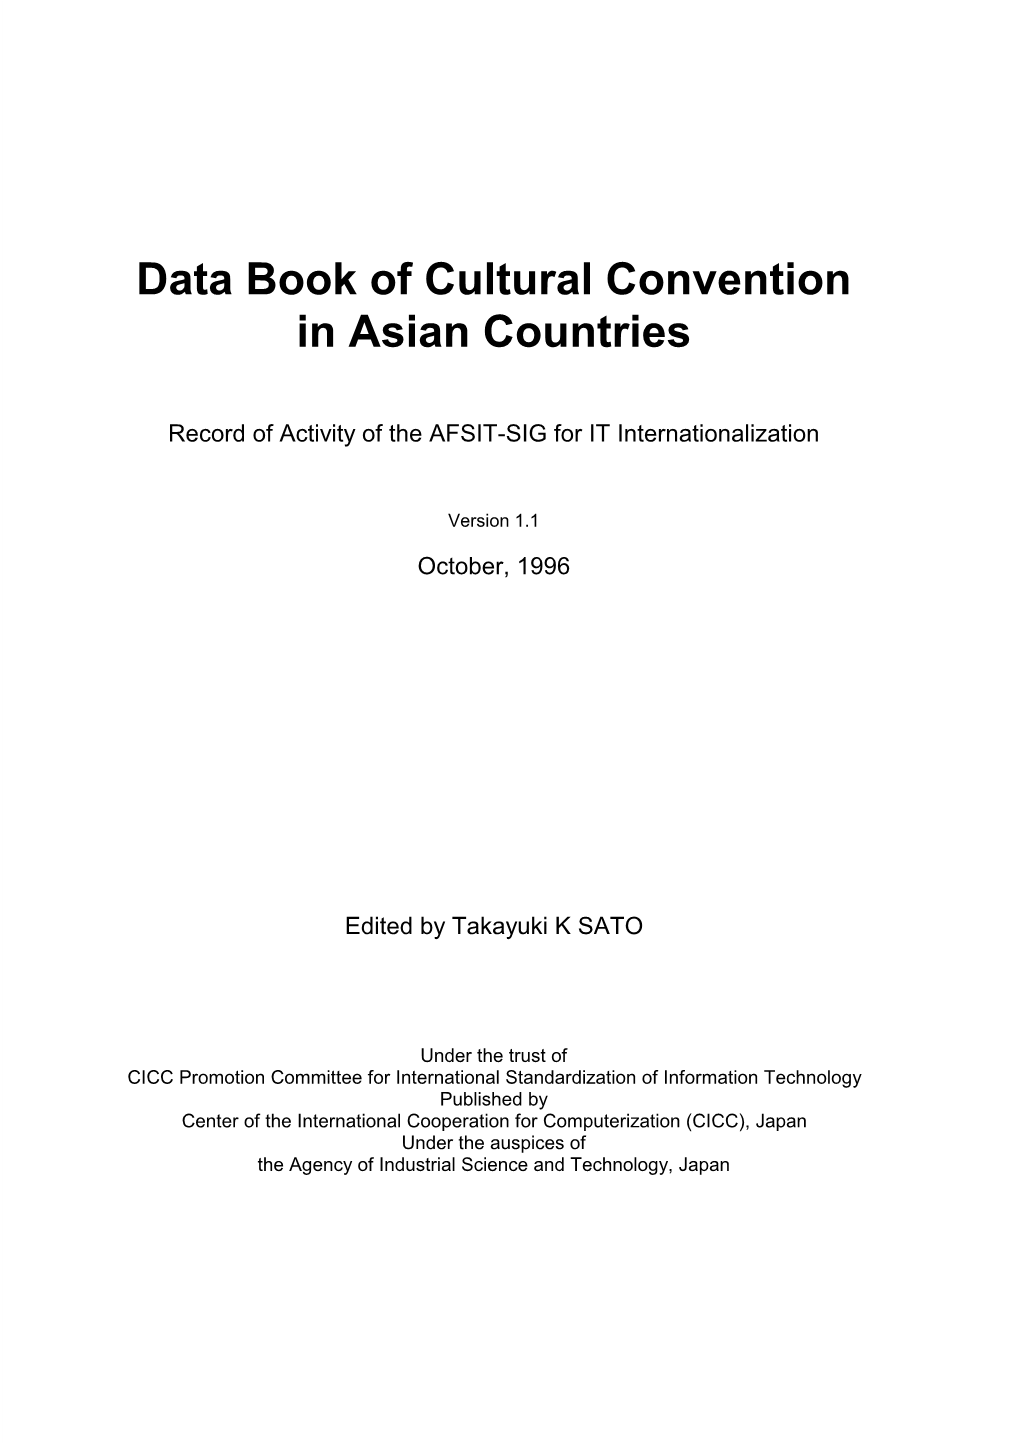 Data Book of Cultural Convention in Asian Countries